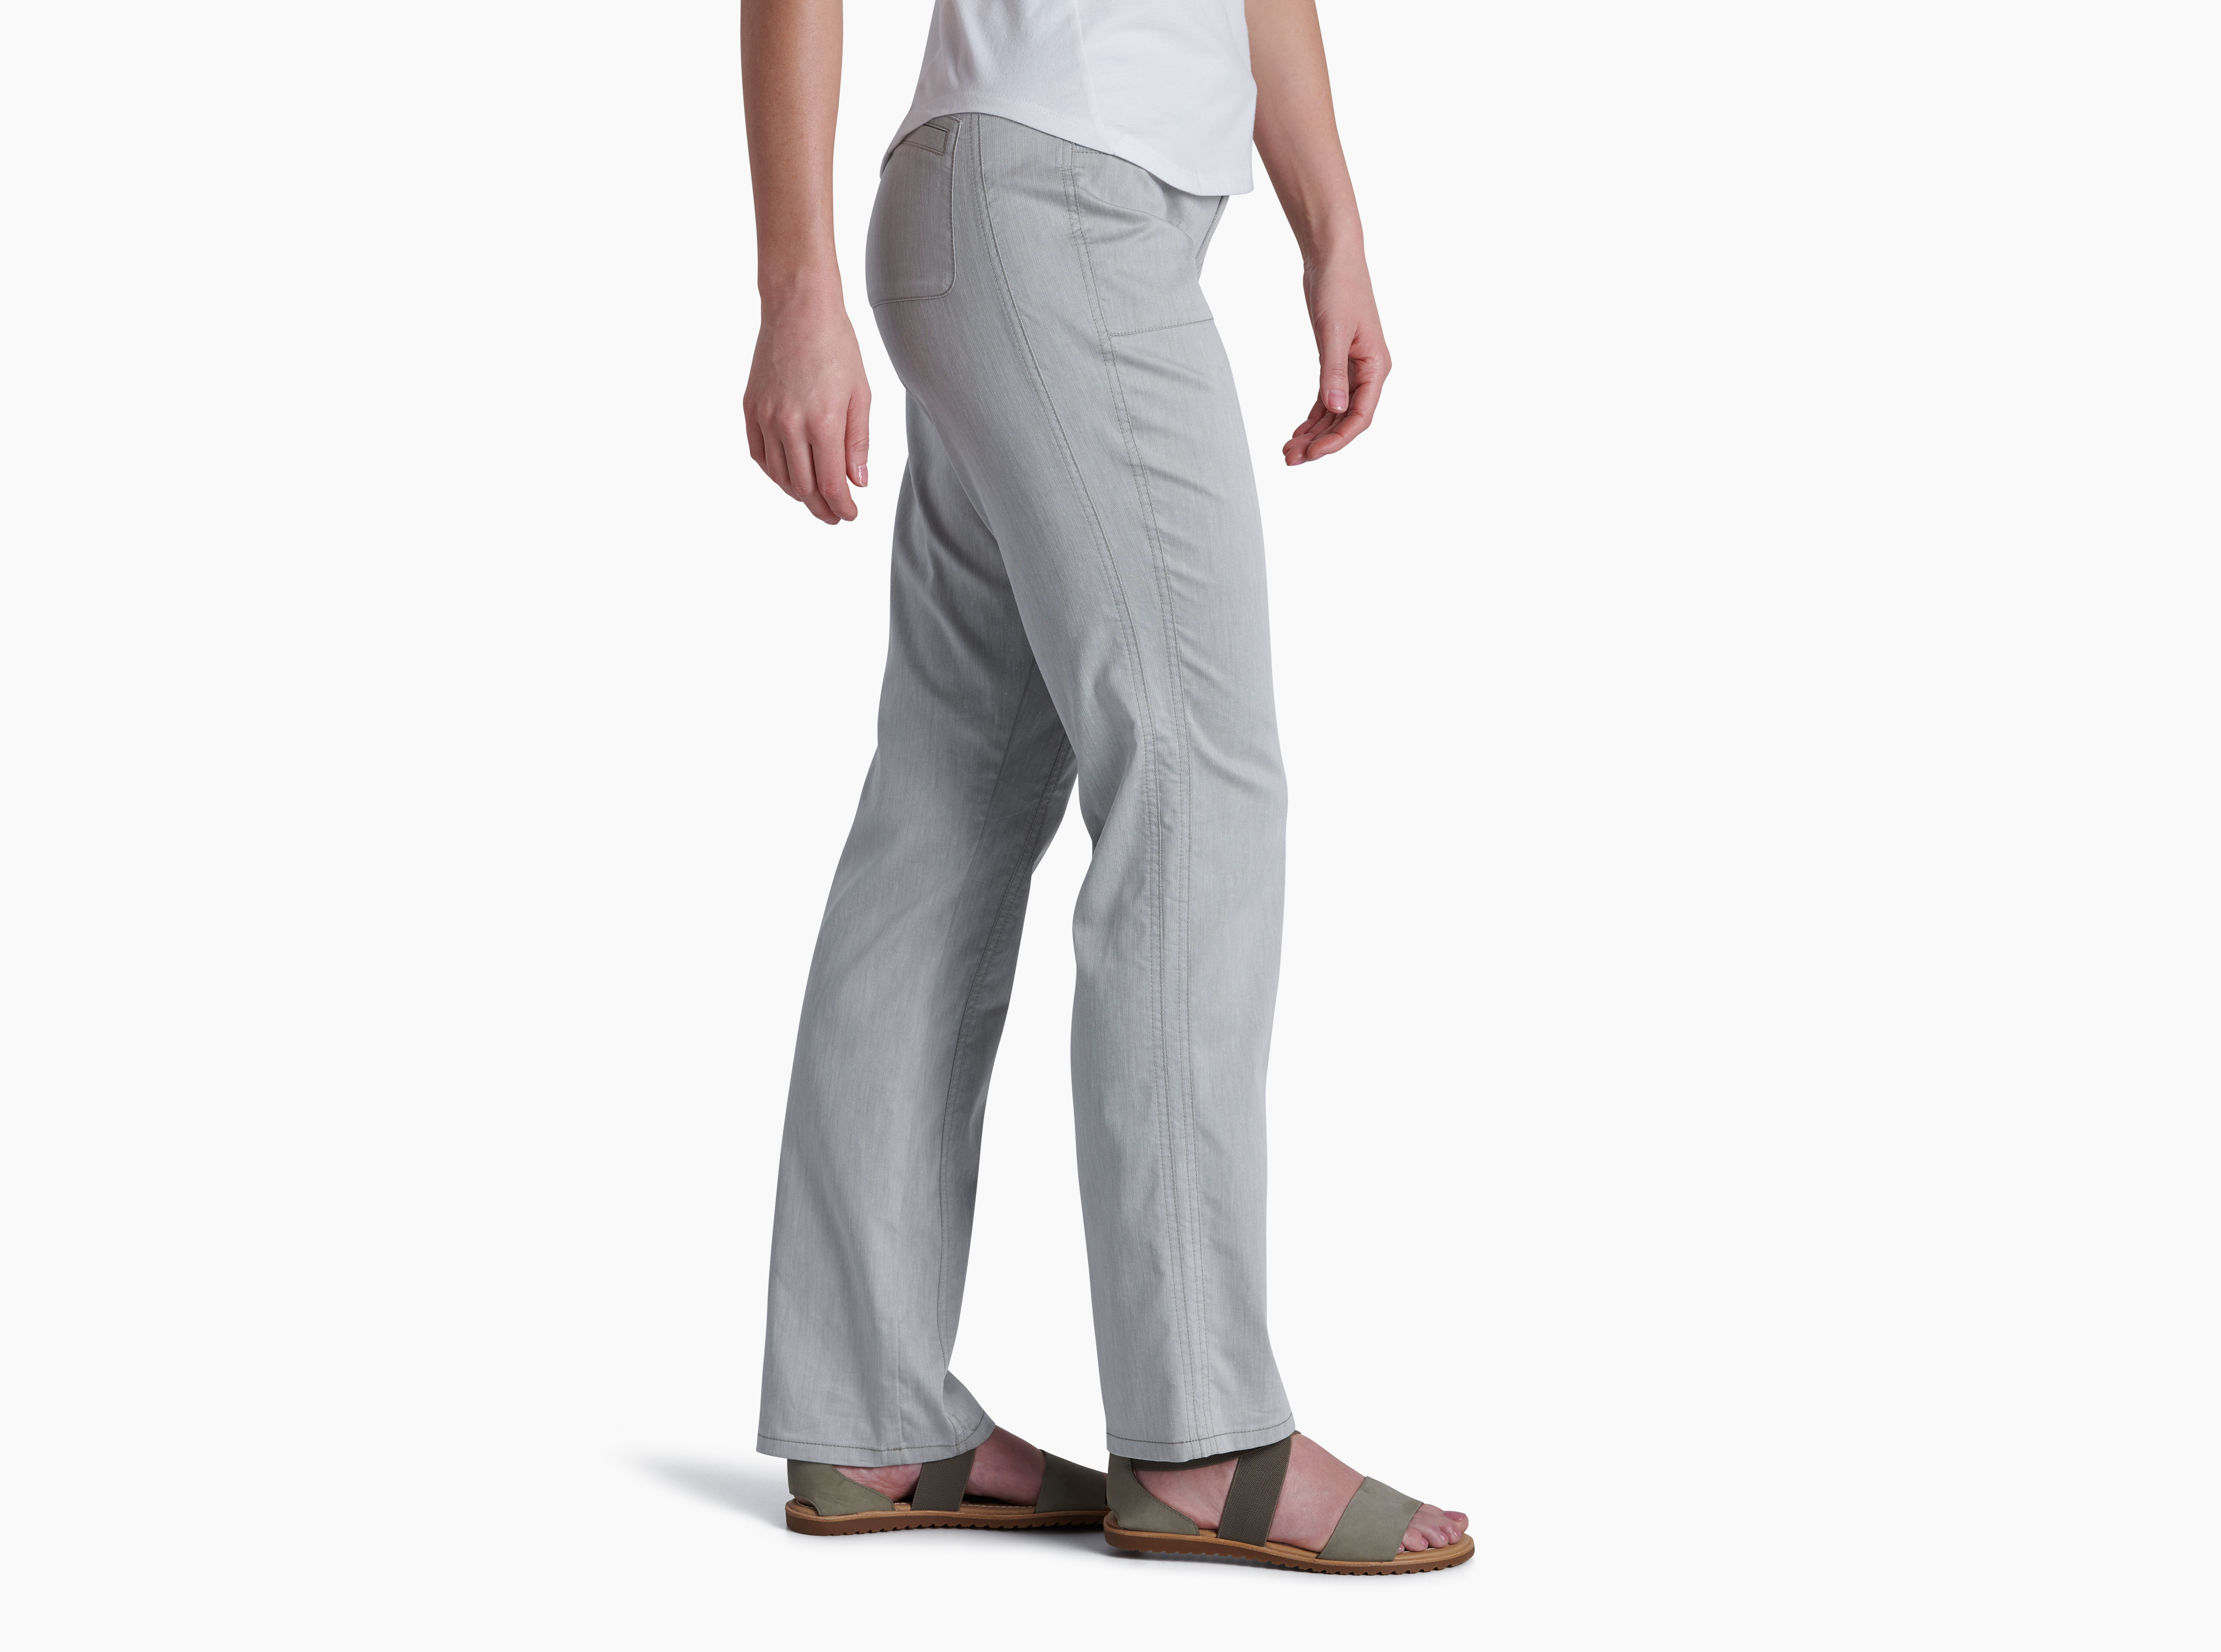 KUHL CABO Series 6272-AS-2X30 Pants, XS, 2 in Waist, 30 i